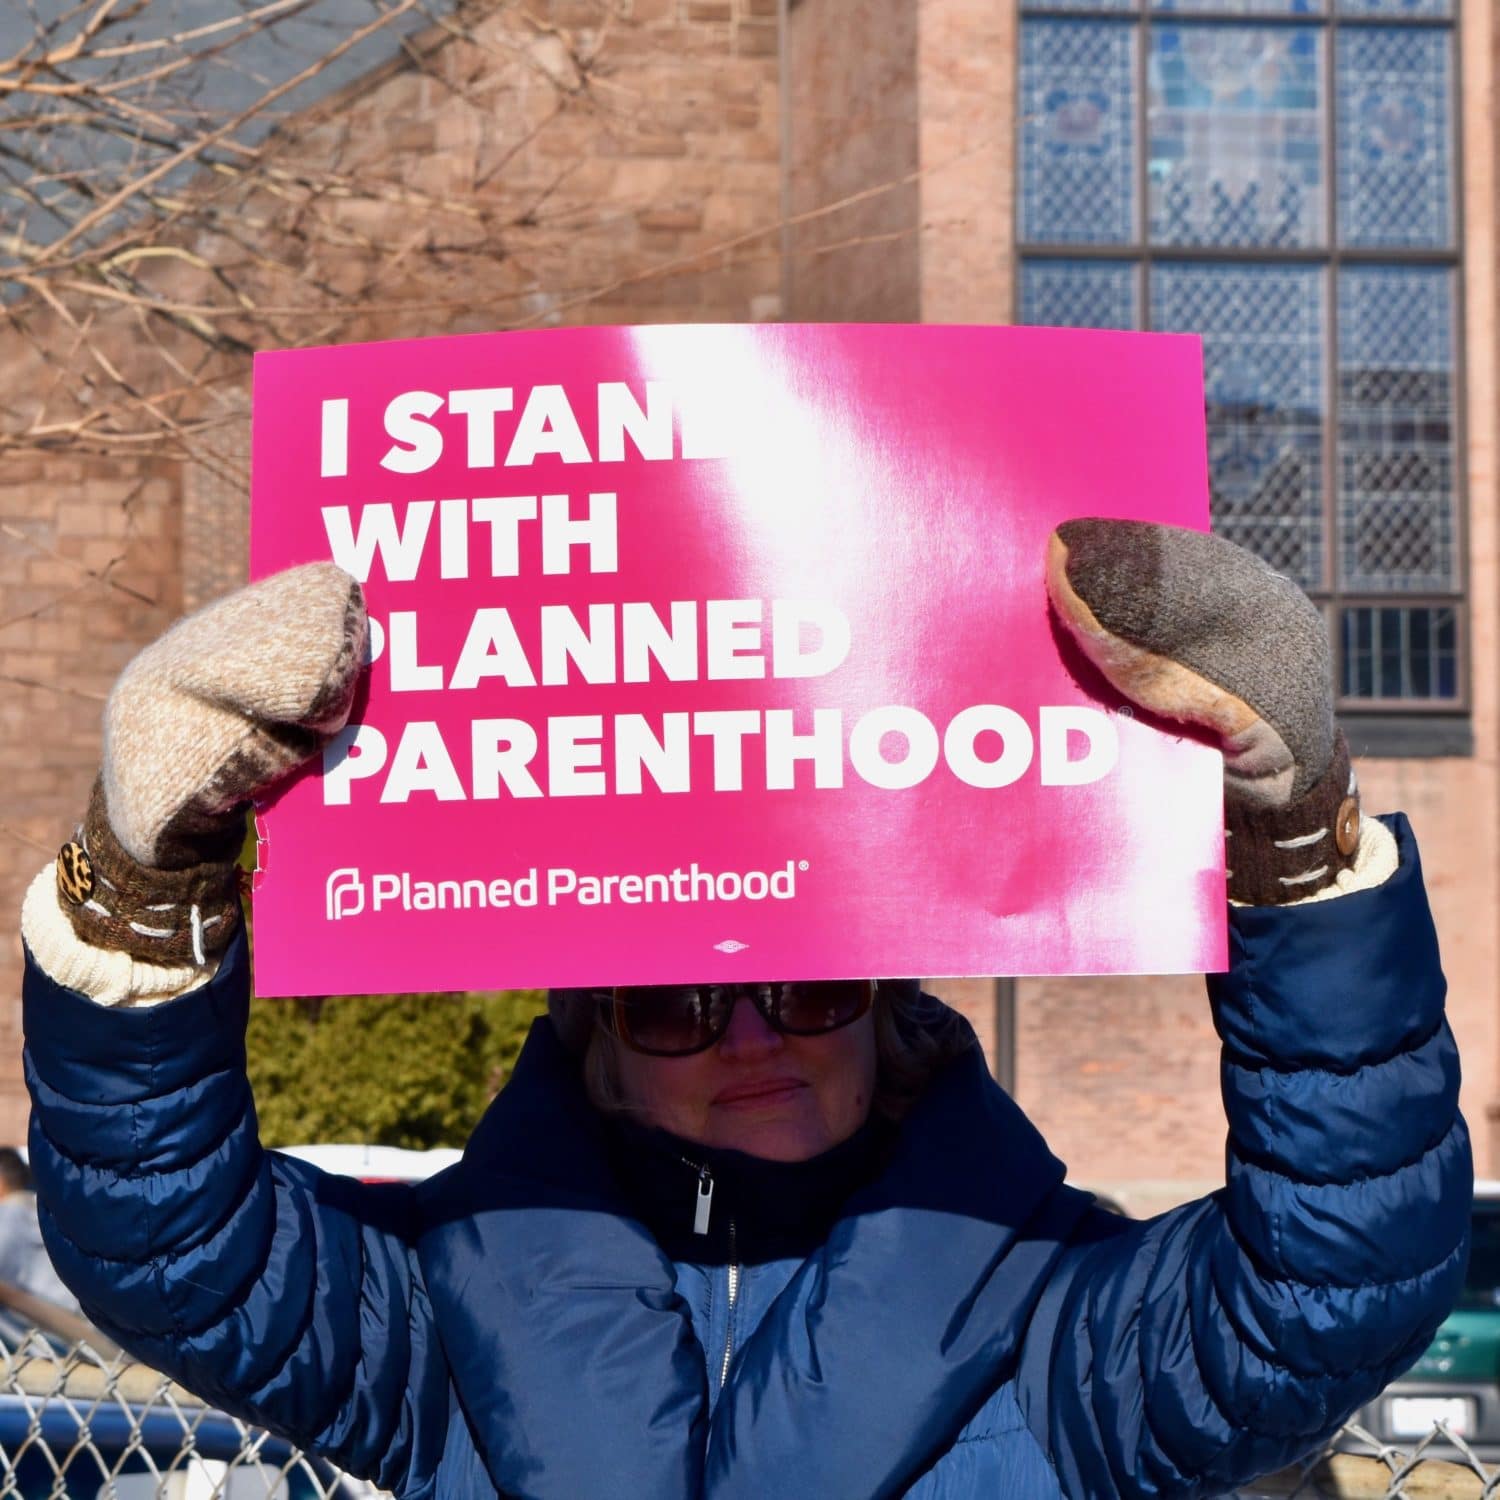 Planned Parenthood Votes! RI PAC: Primary races provide victories for reproductive freedom